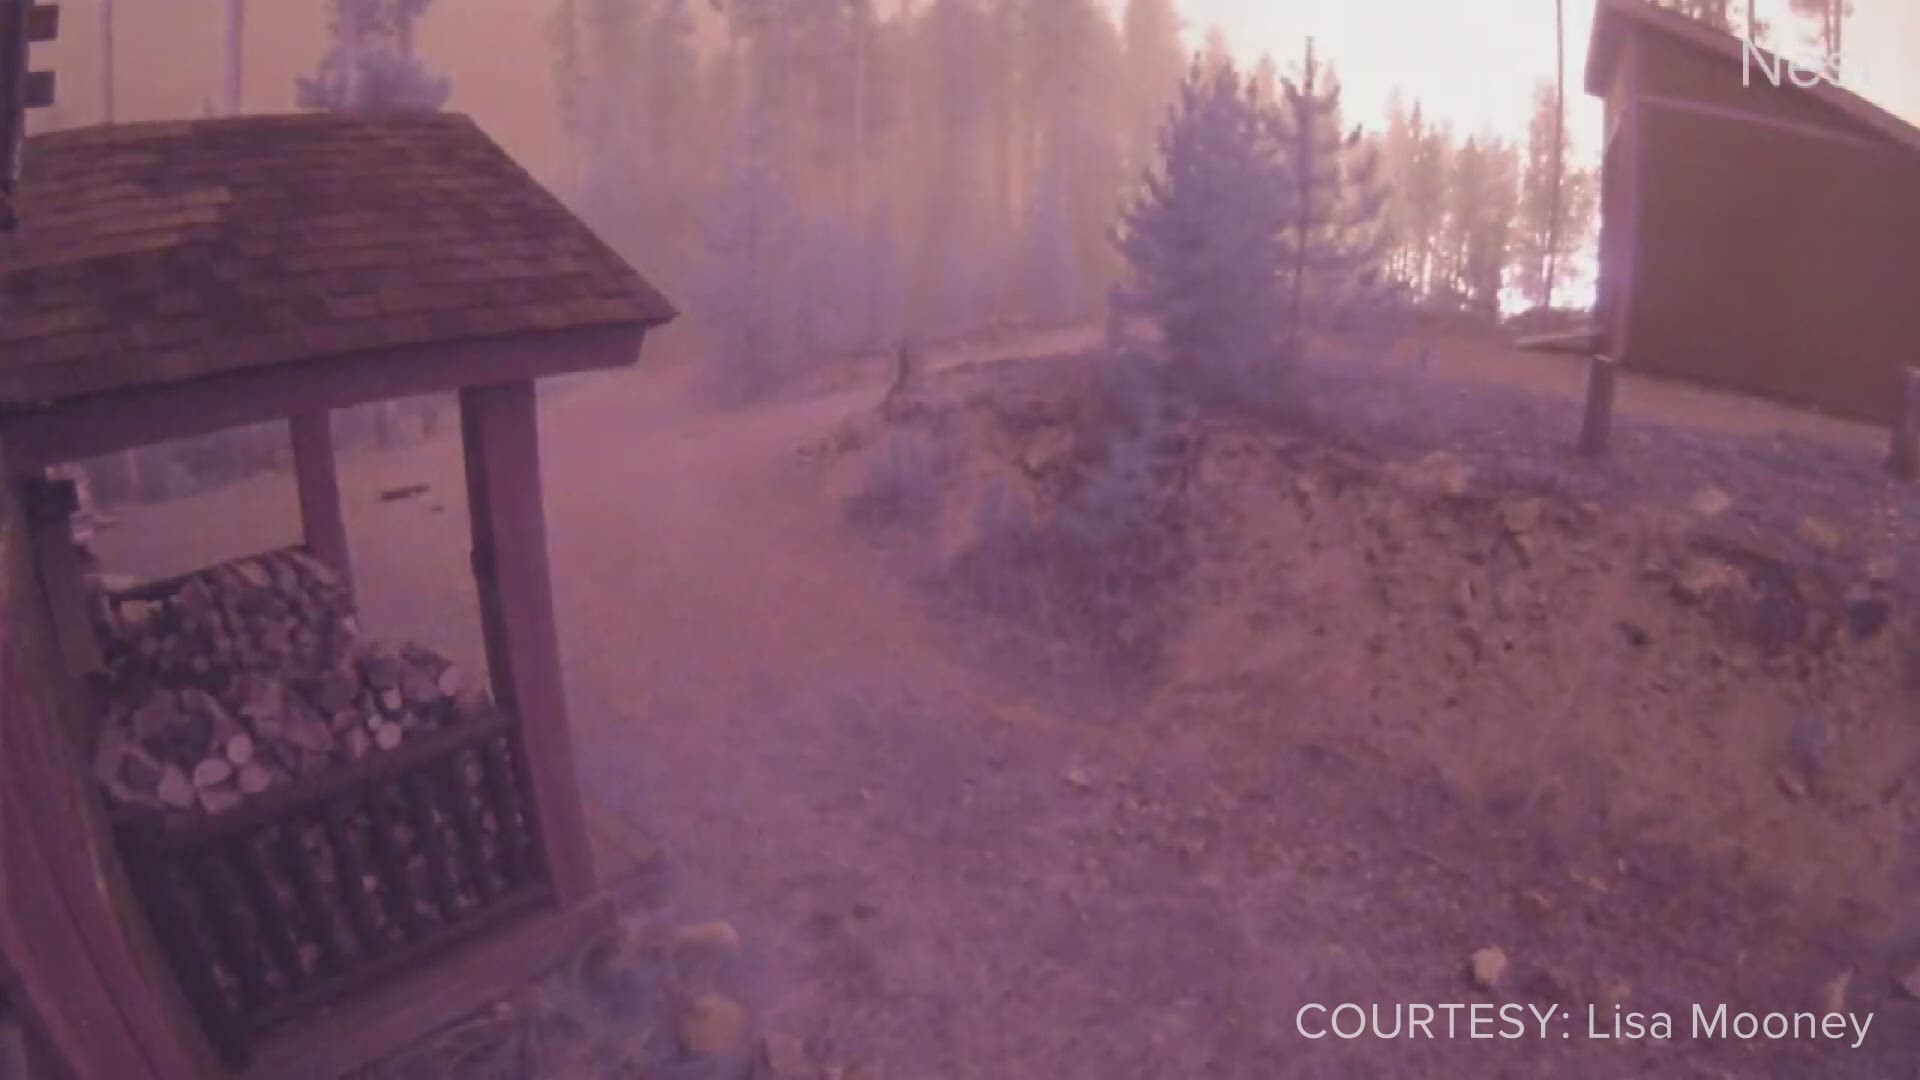 Video shared by Lisa Mooney show flames from the East Troublesome Fire creeping closer to her family's cabin in Grand Lake, Colorado on Wednesday night.